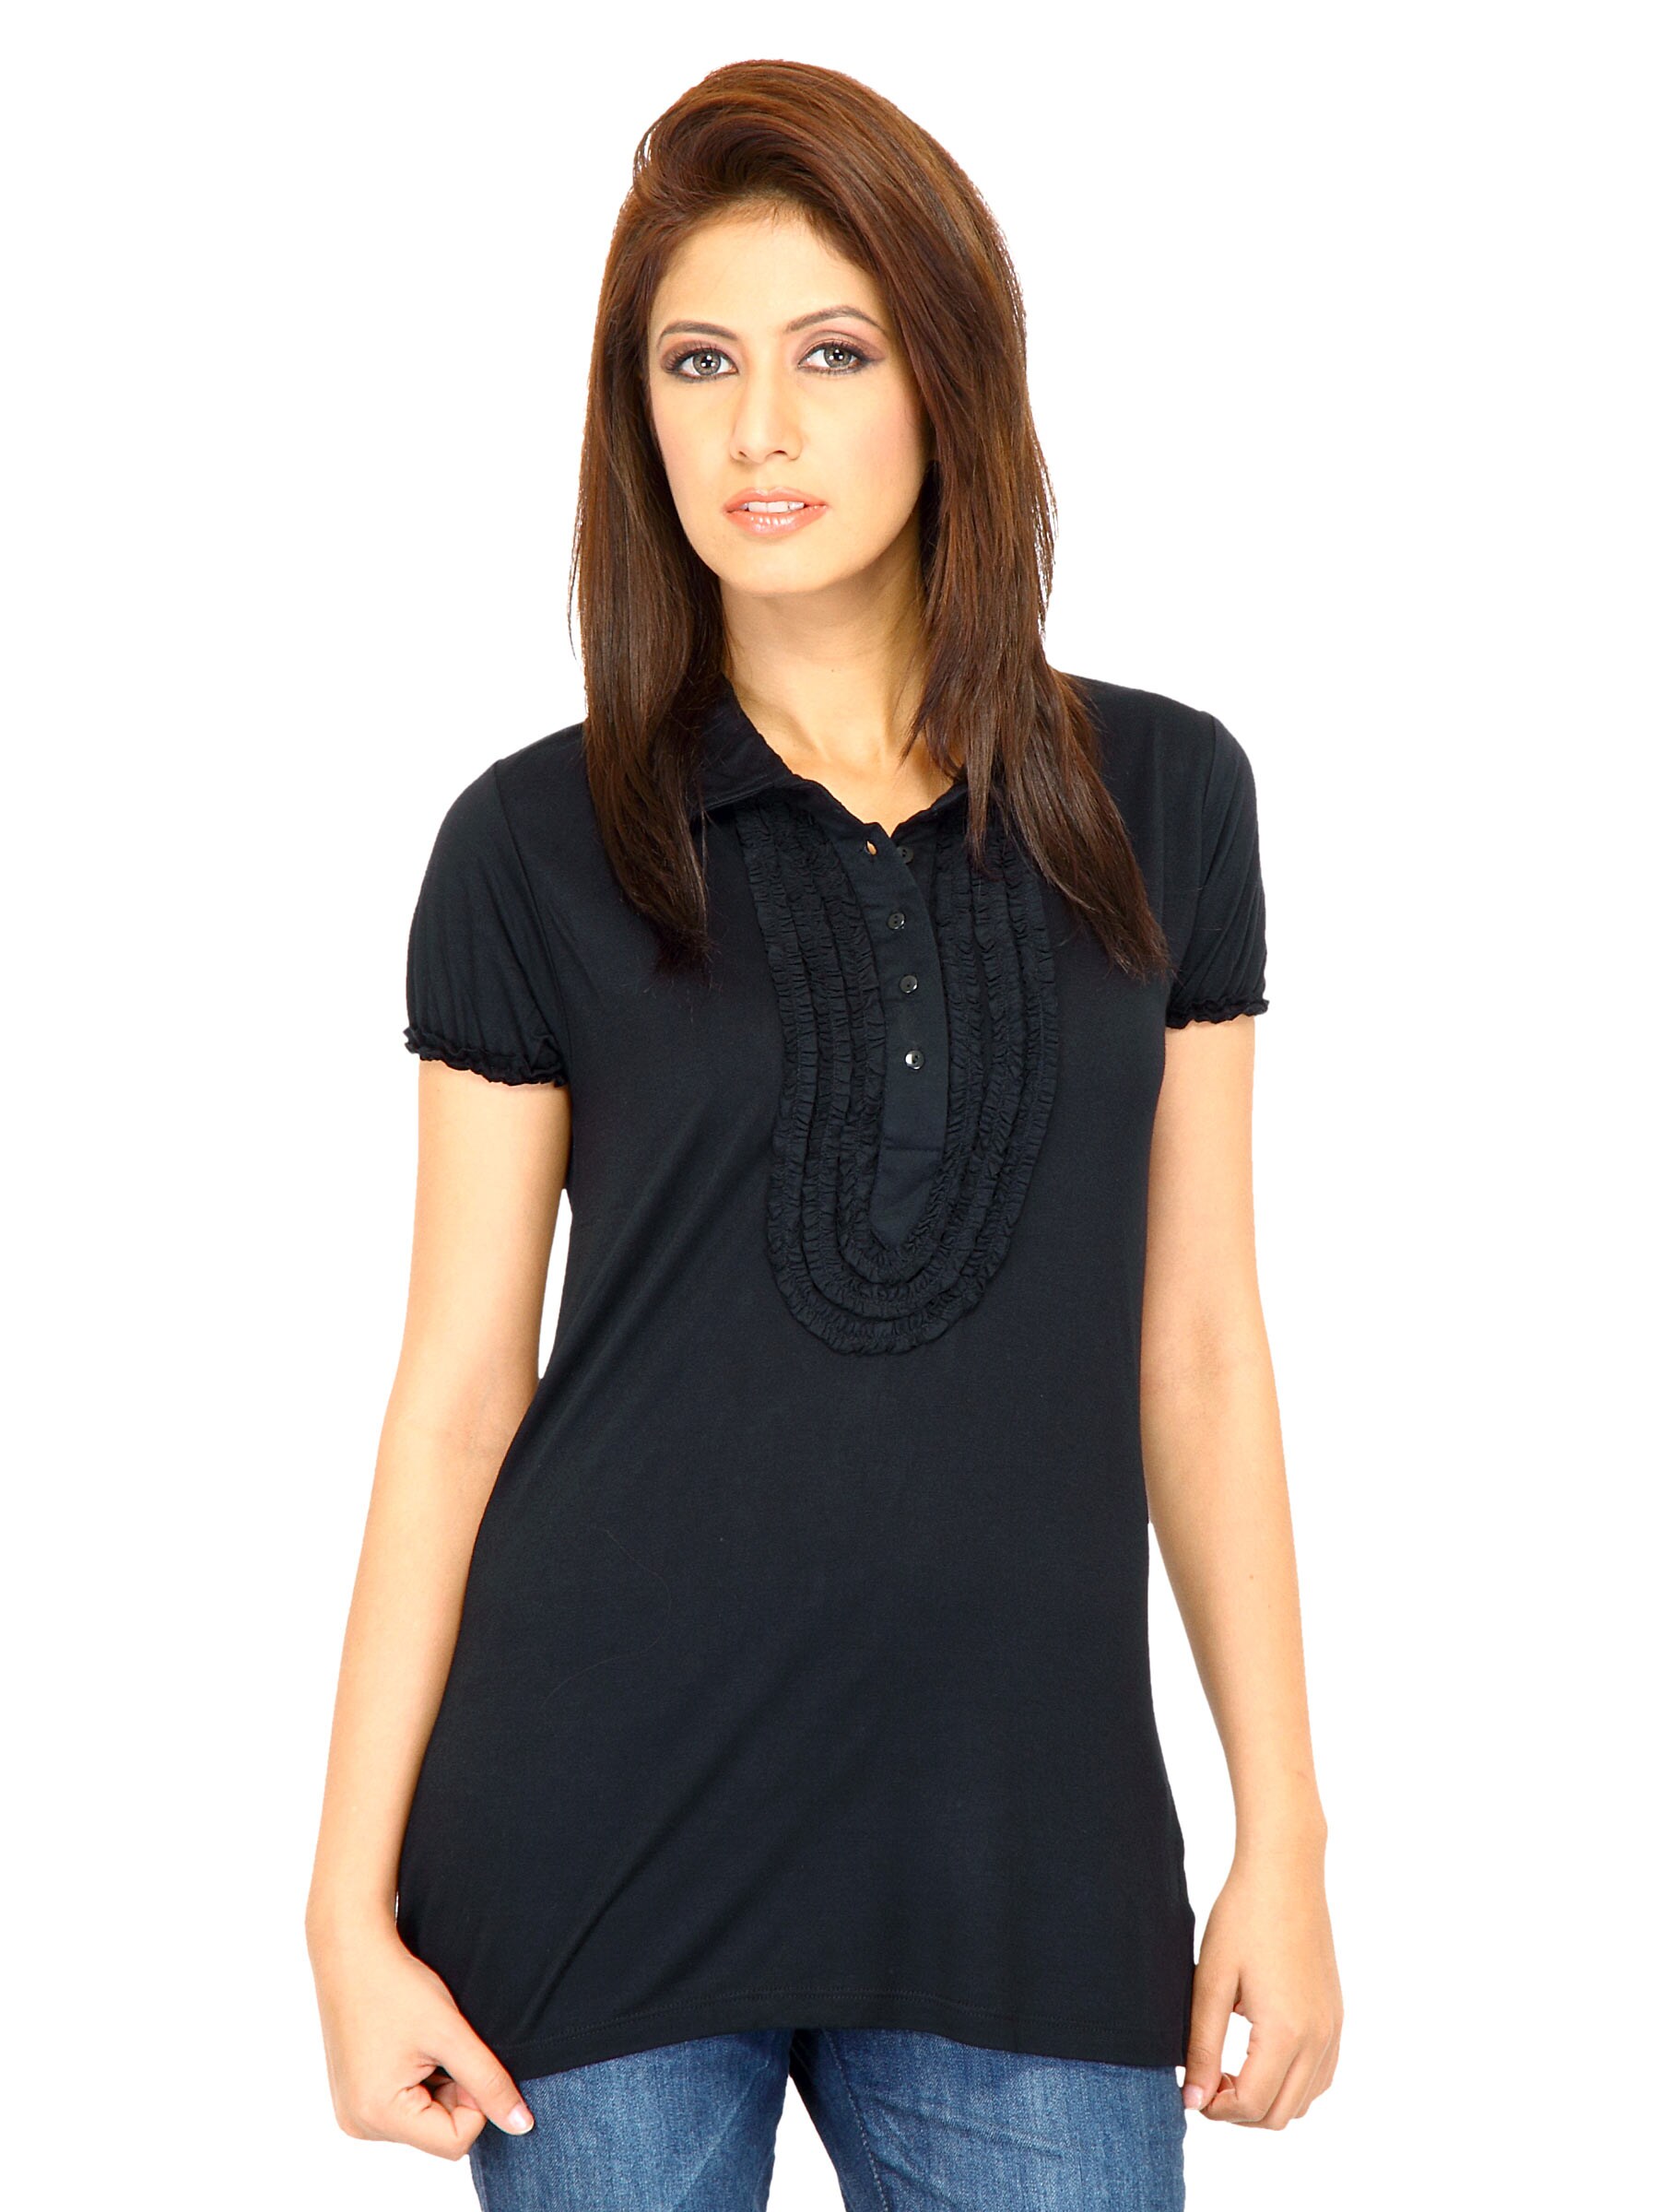 Scullers Women Solid Black Tops